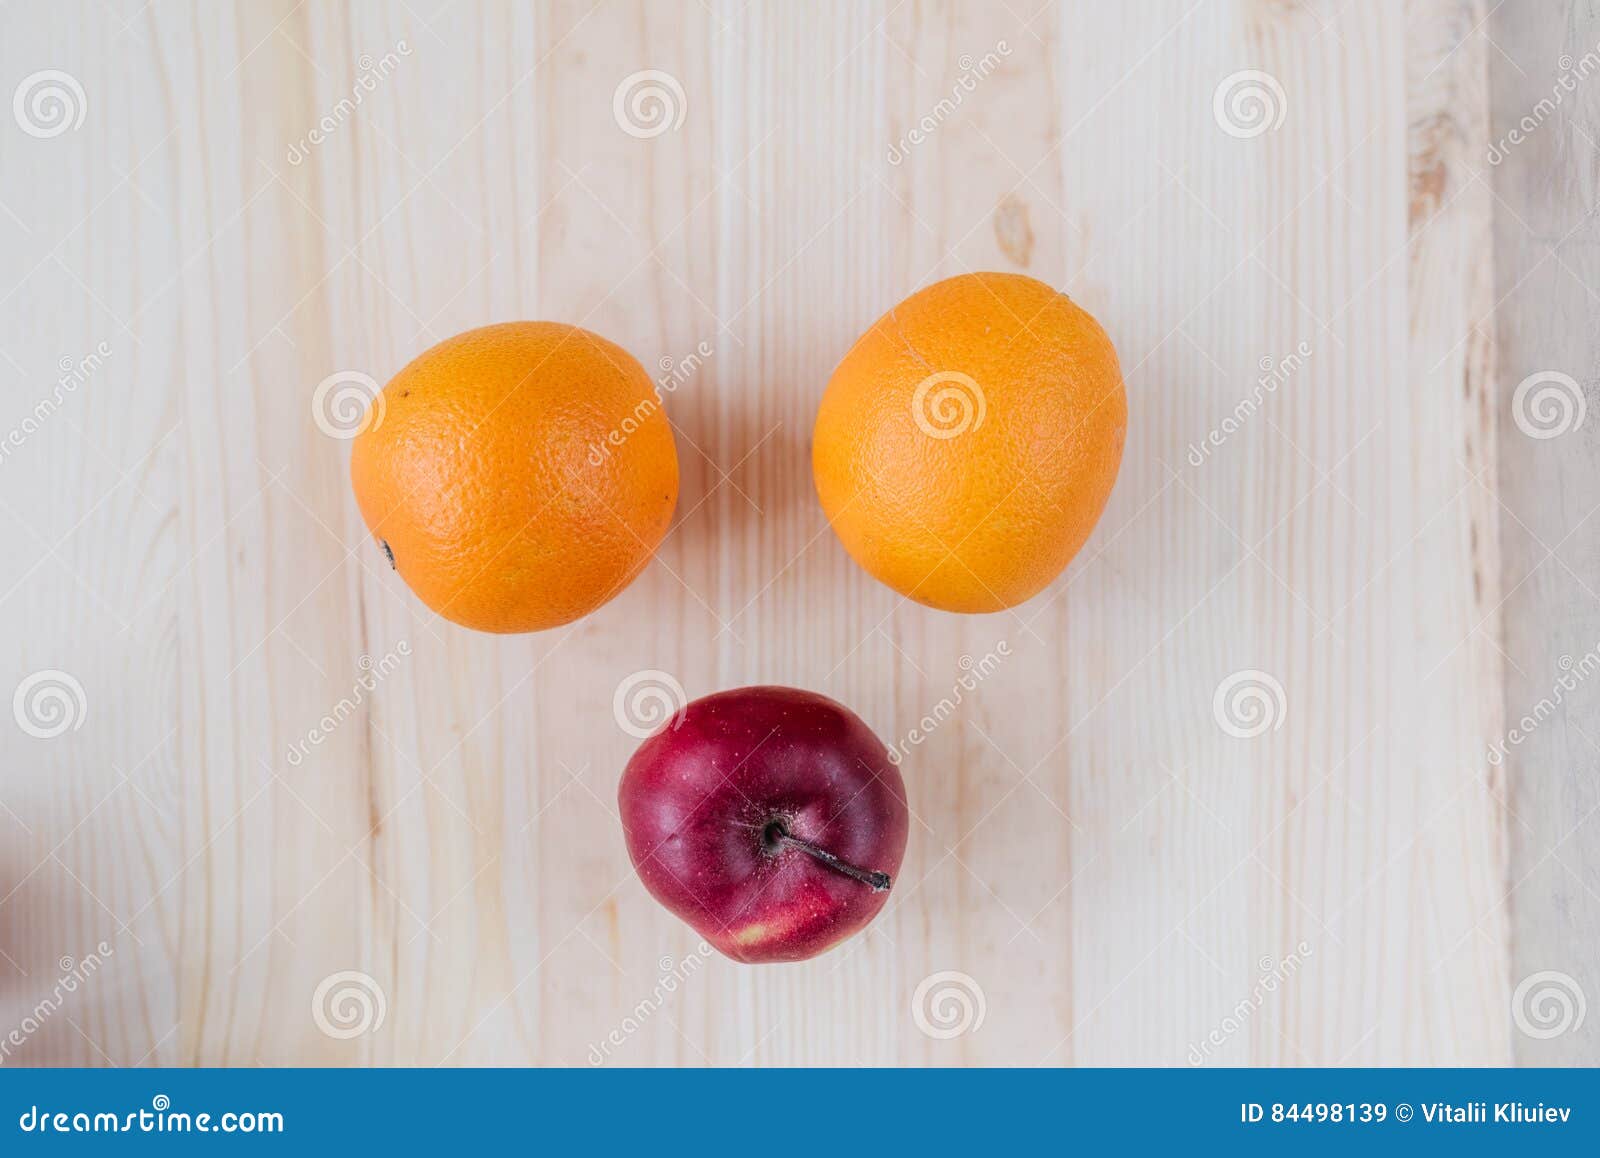 Fresh Red and Green Apple, Orange on Wooden Decks. Stock Image - Image